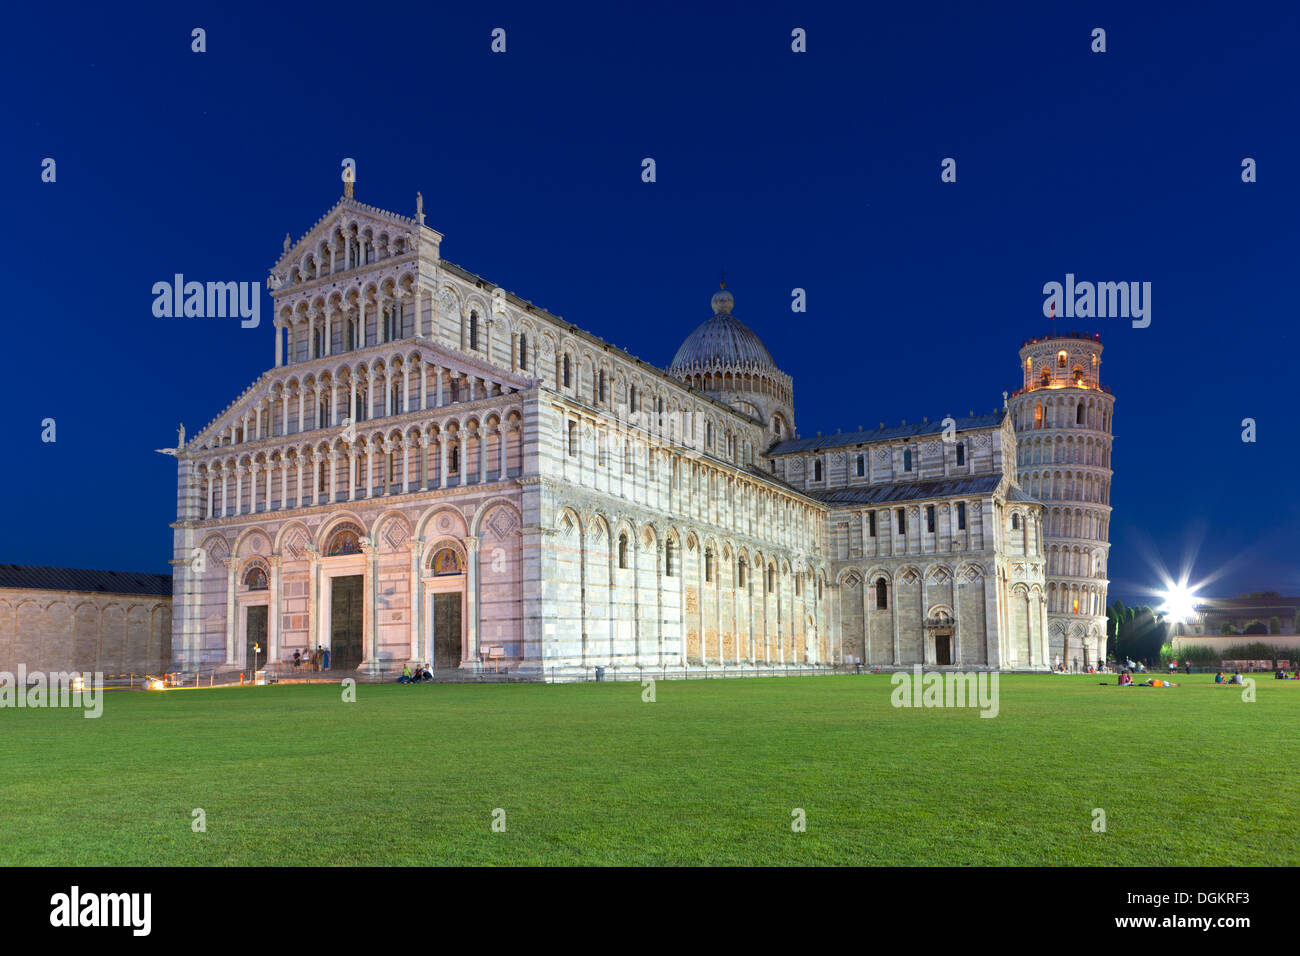 Cathedral and Leaning Tower of Pisa at Piazza dei Miracoli in Pisa. Stock Photo